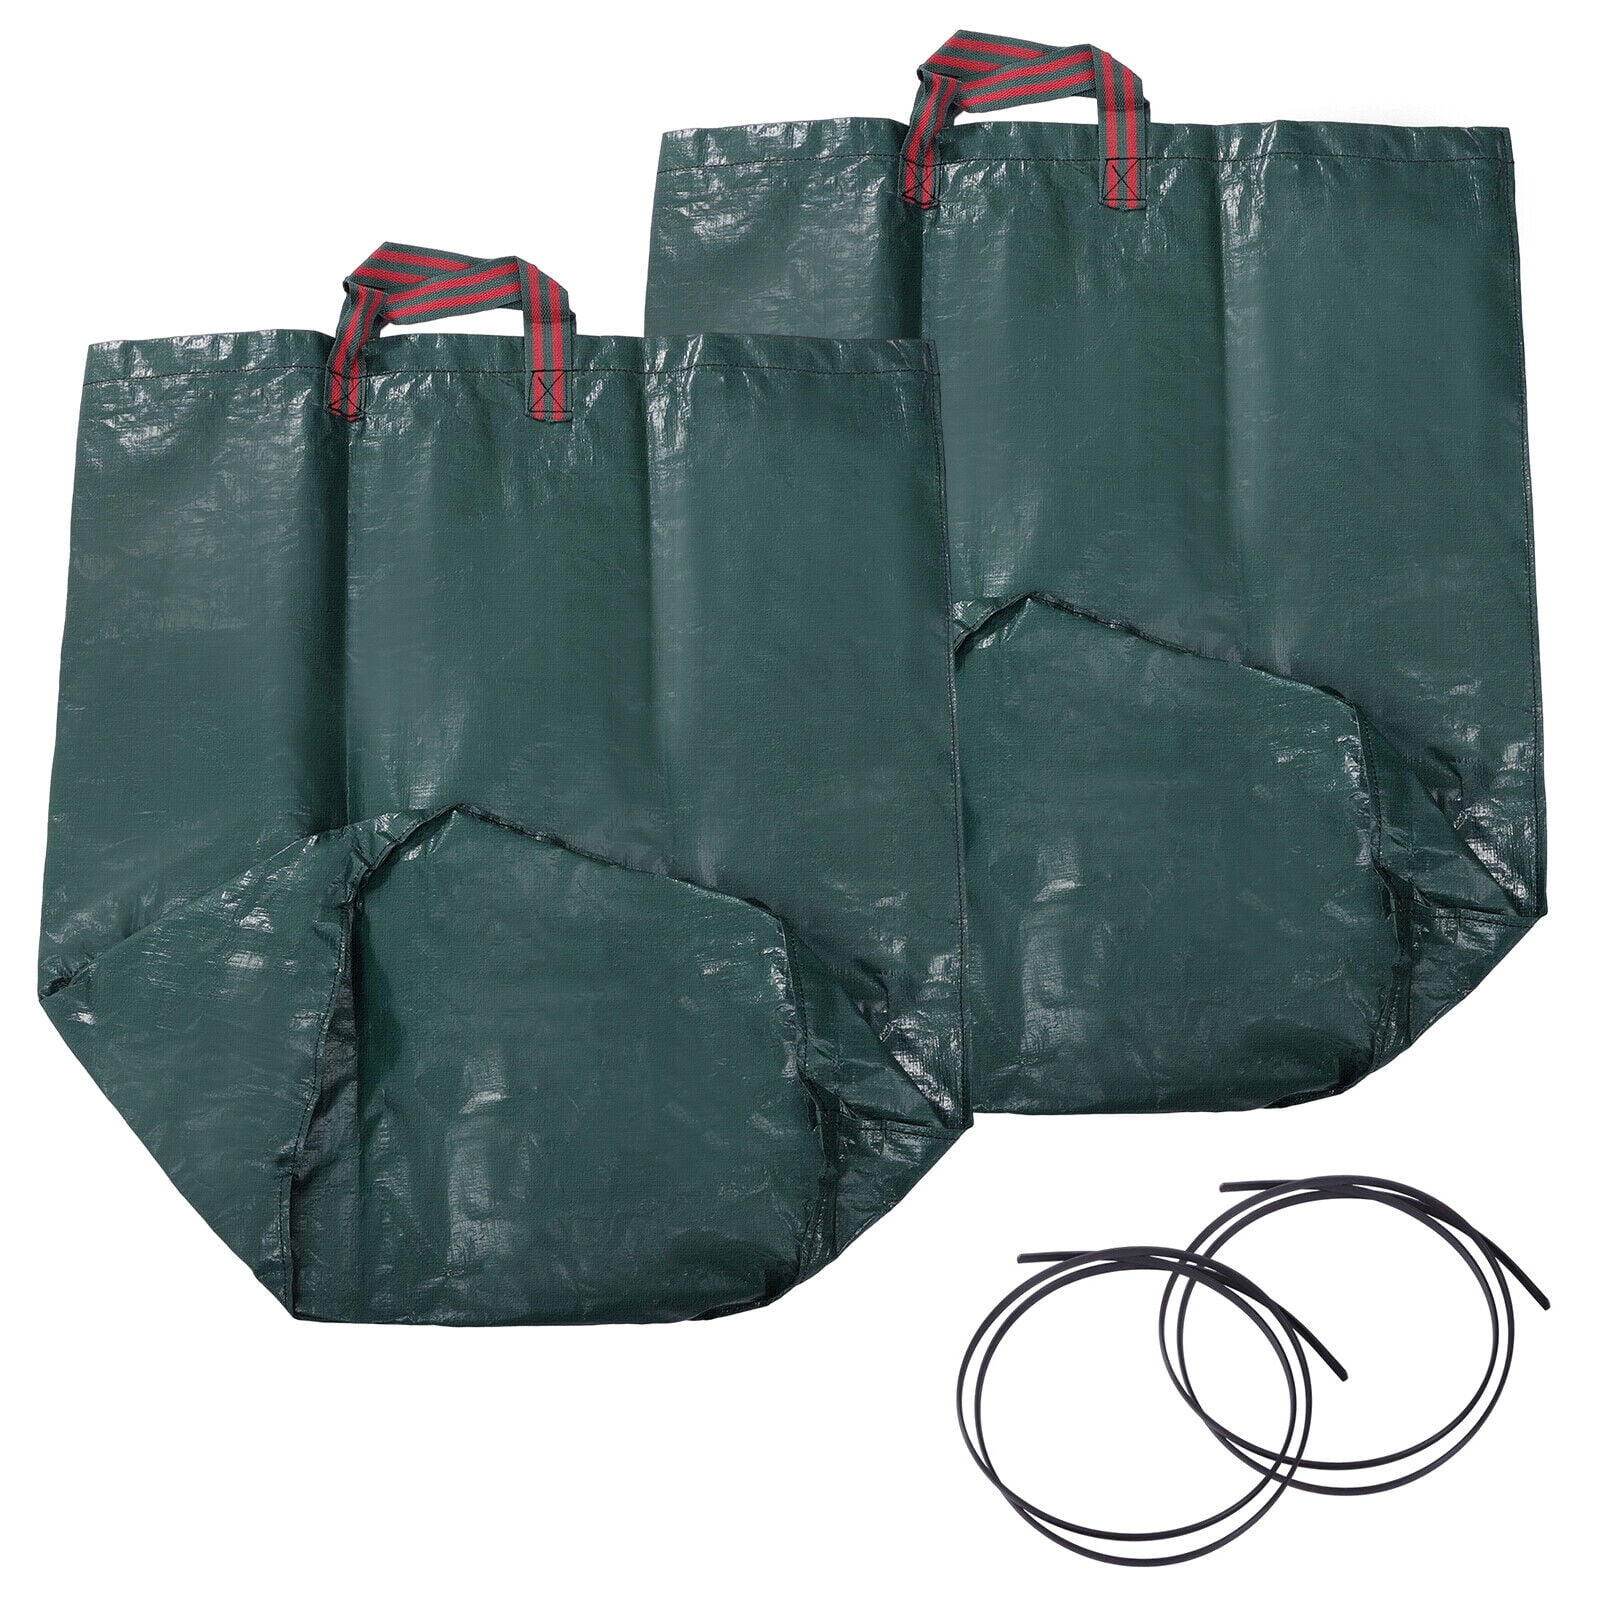 IWNTWY 2-Pack 32 Gallons Leaf Bags, Reusable Yard Waste Bags, Heavy Duty  Upright Lawn Bags with 4 Handles for Garden Leaves and Waste Collection